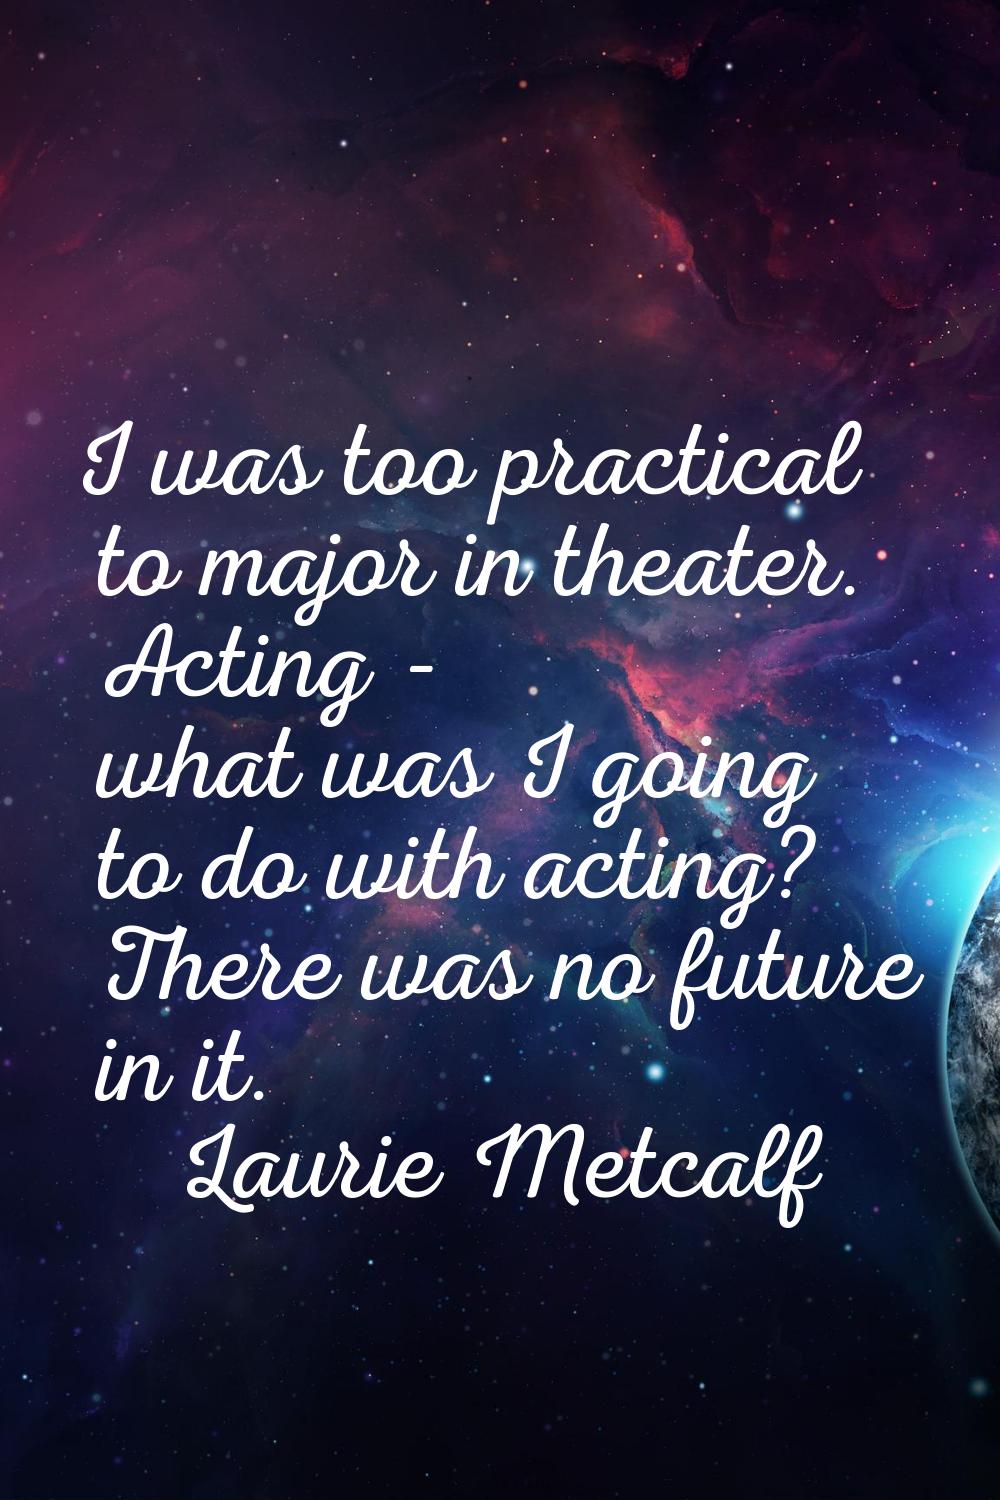 I was too practical to major in theater. Acting - what was I going to do with acting? There was no 